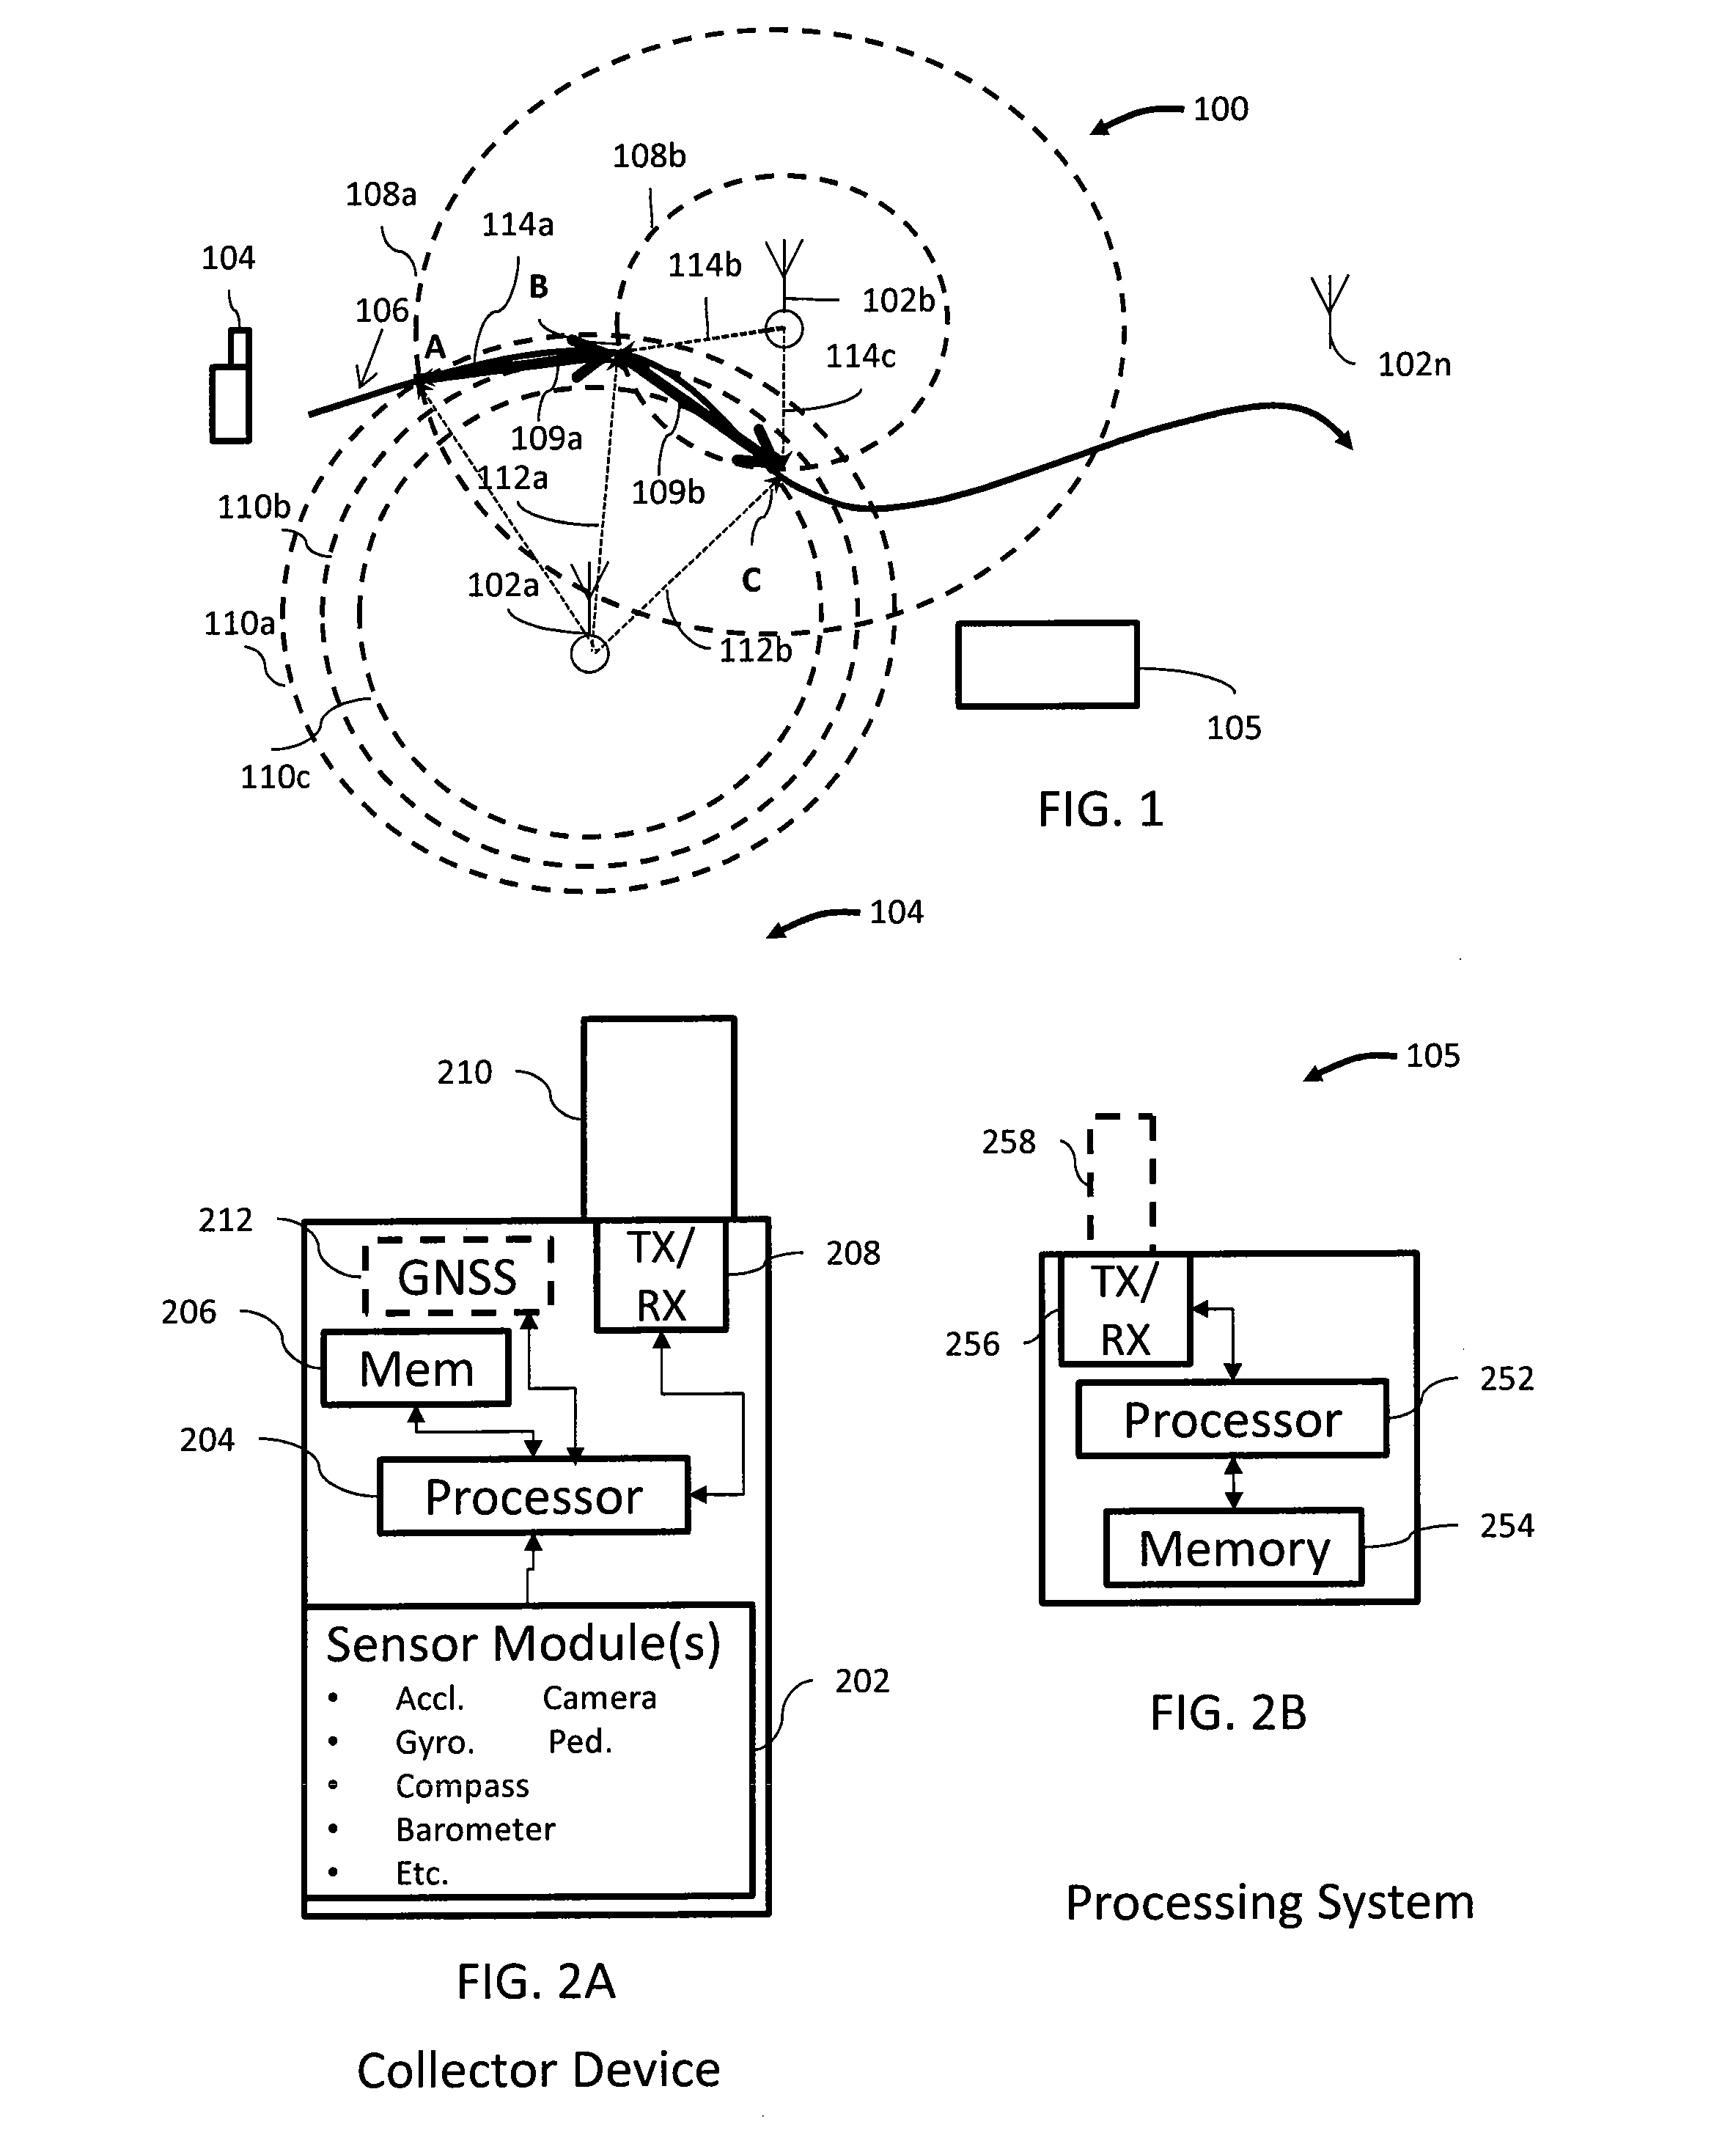 Access point location identification methods and apparatus based on absolute and relative harvesting